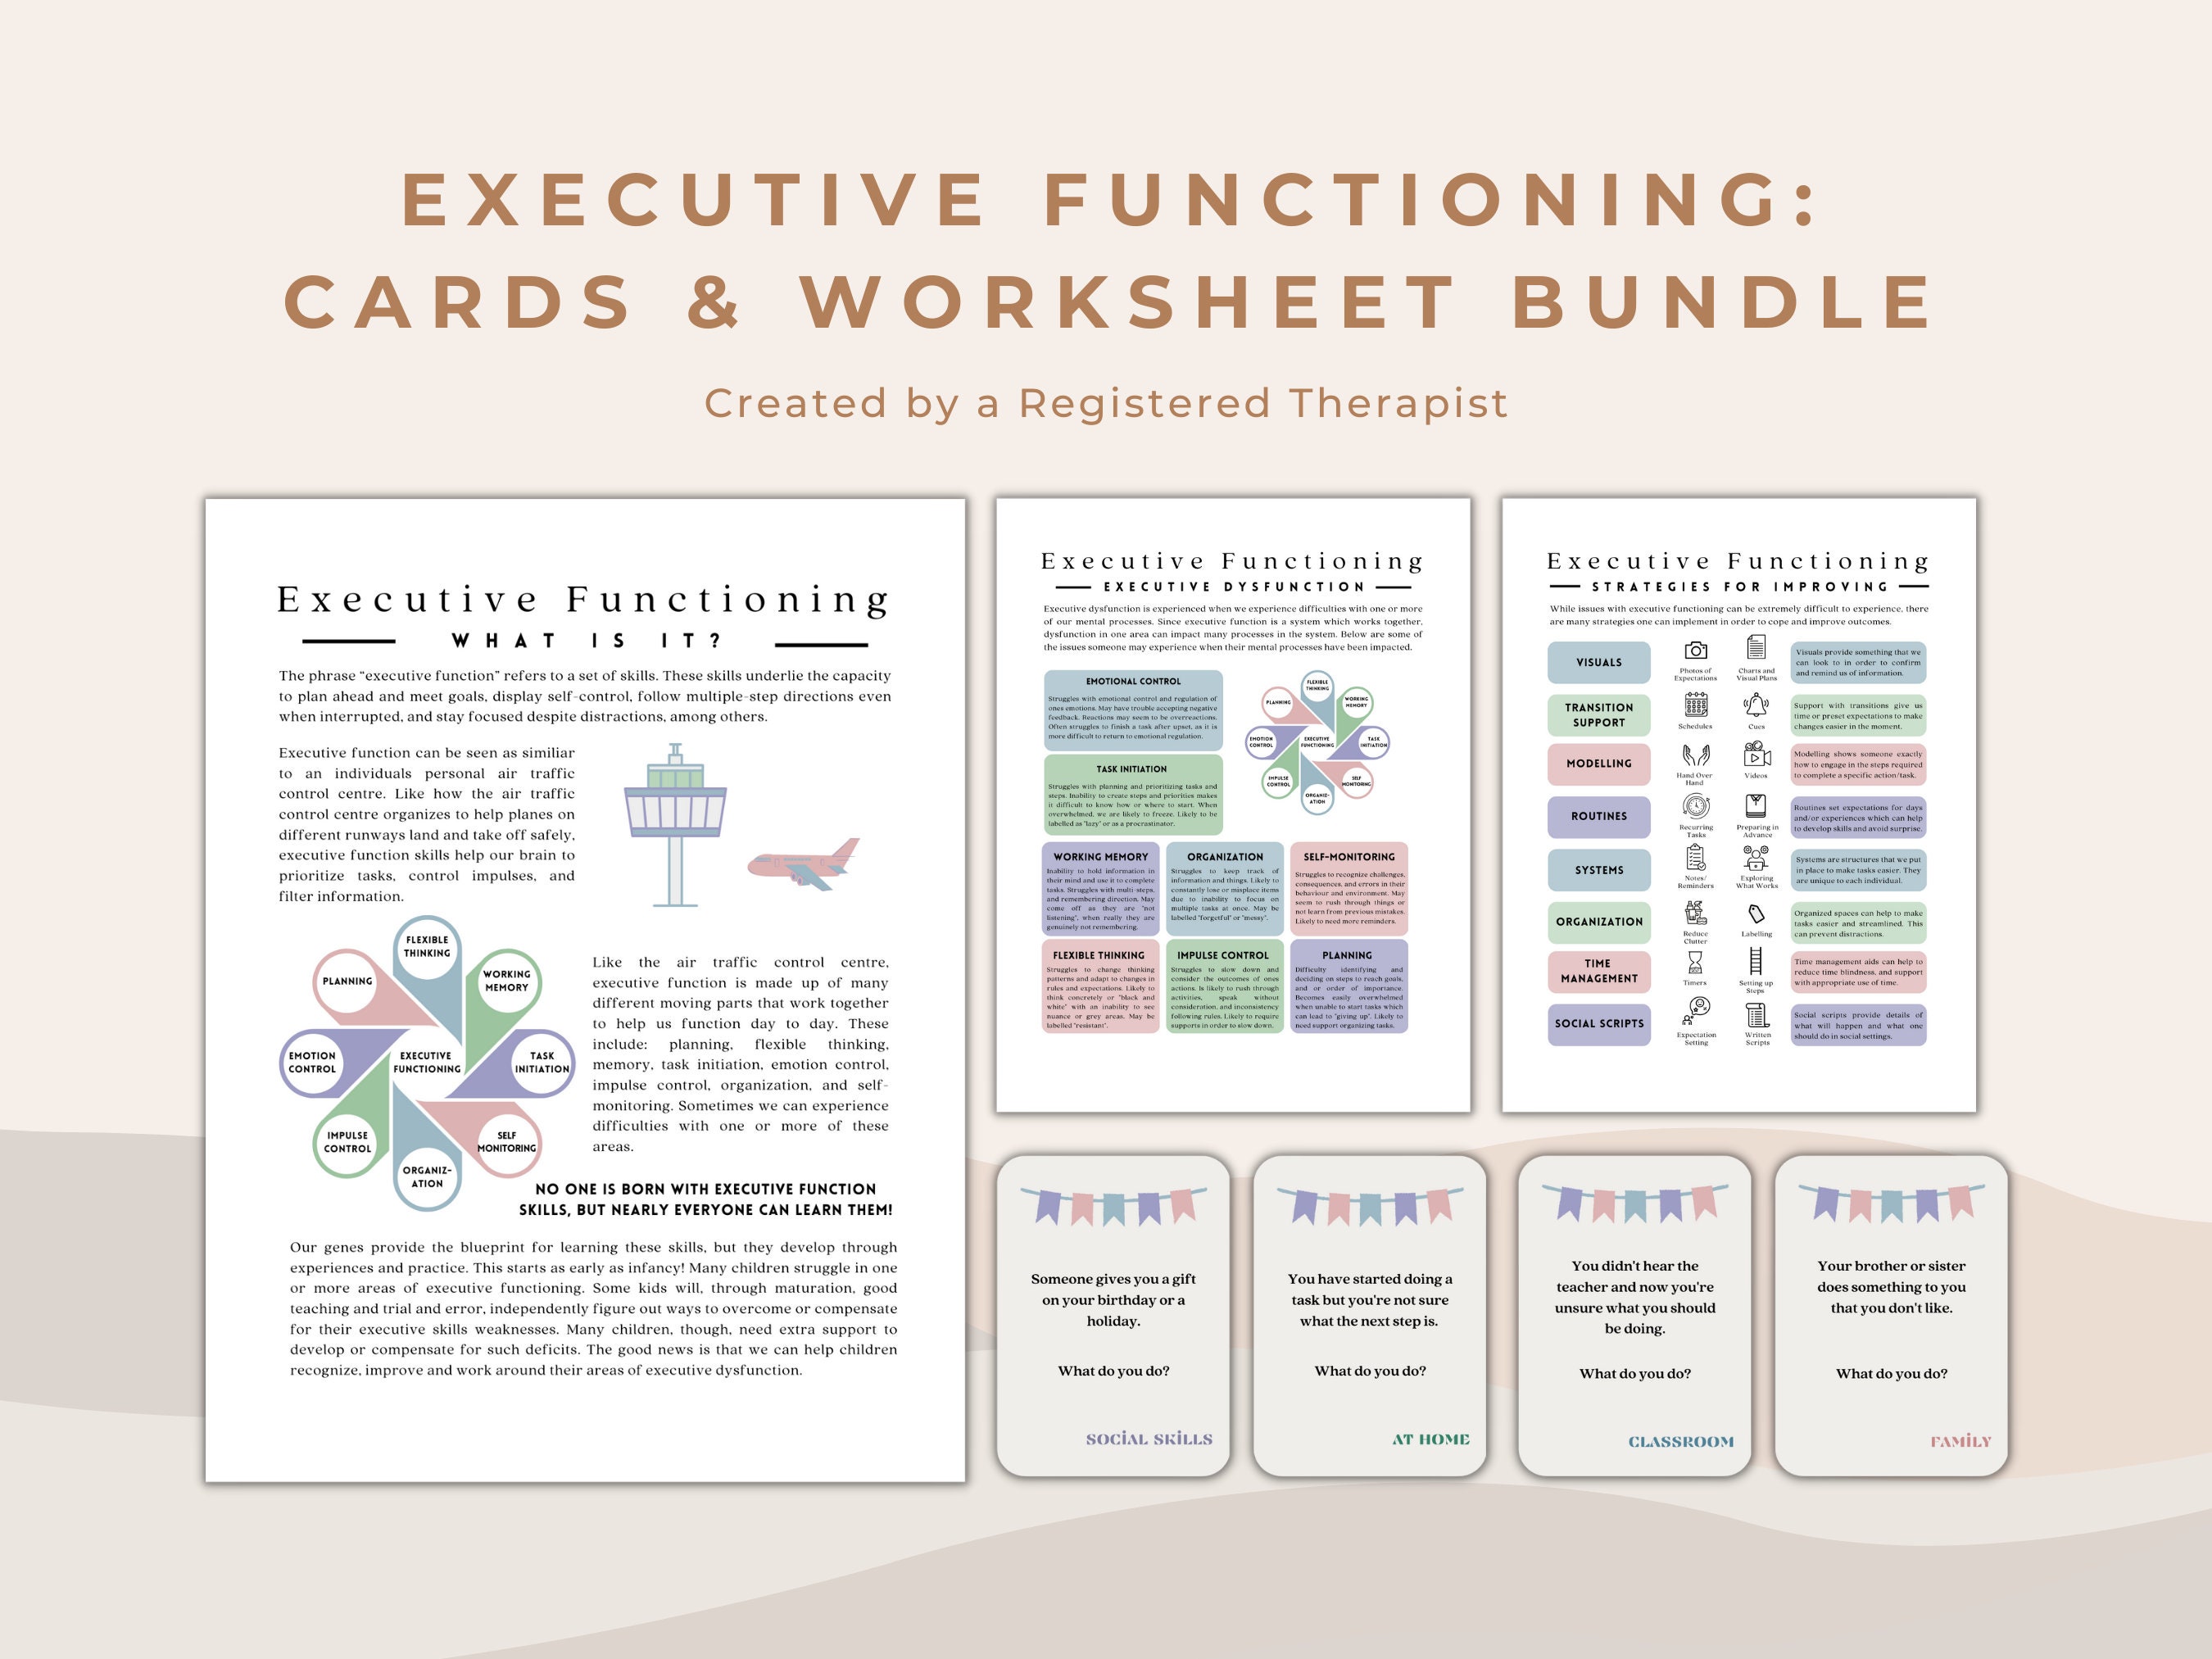 Executive Function ADHD Worksheets & Task Cards for Mental Health Professionals, Parents, and Teachers | Executive Functioning Therapy Tool